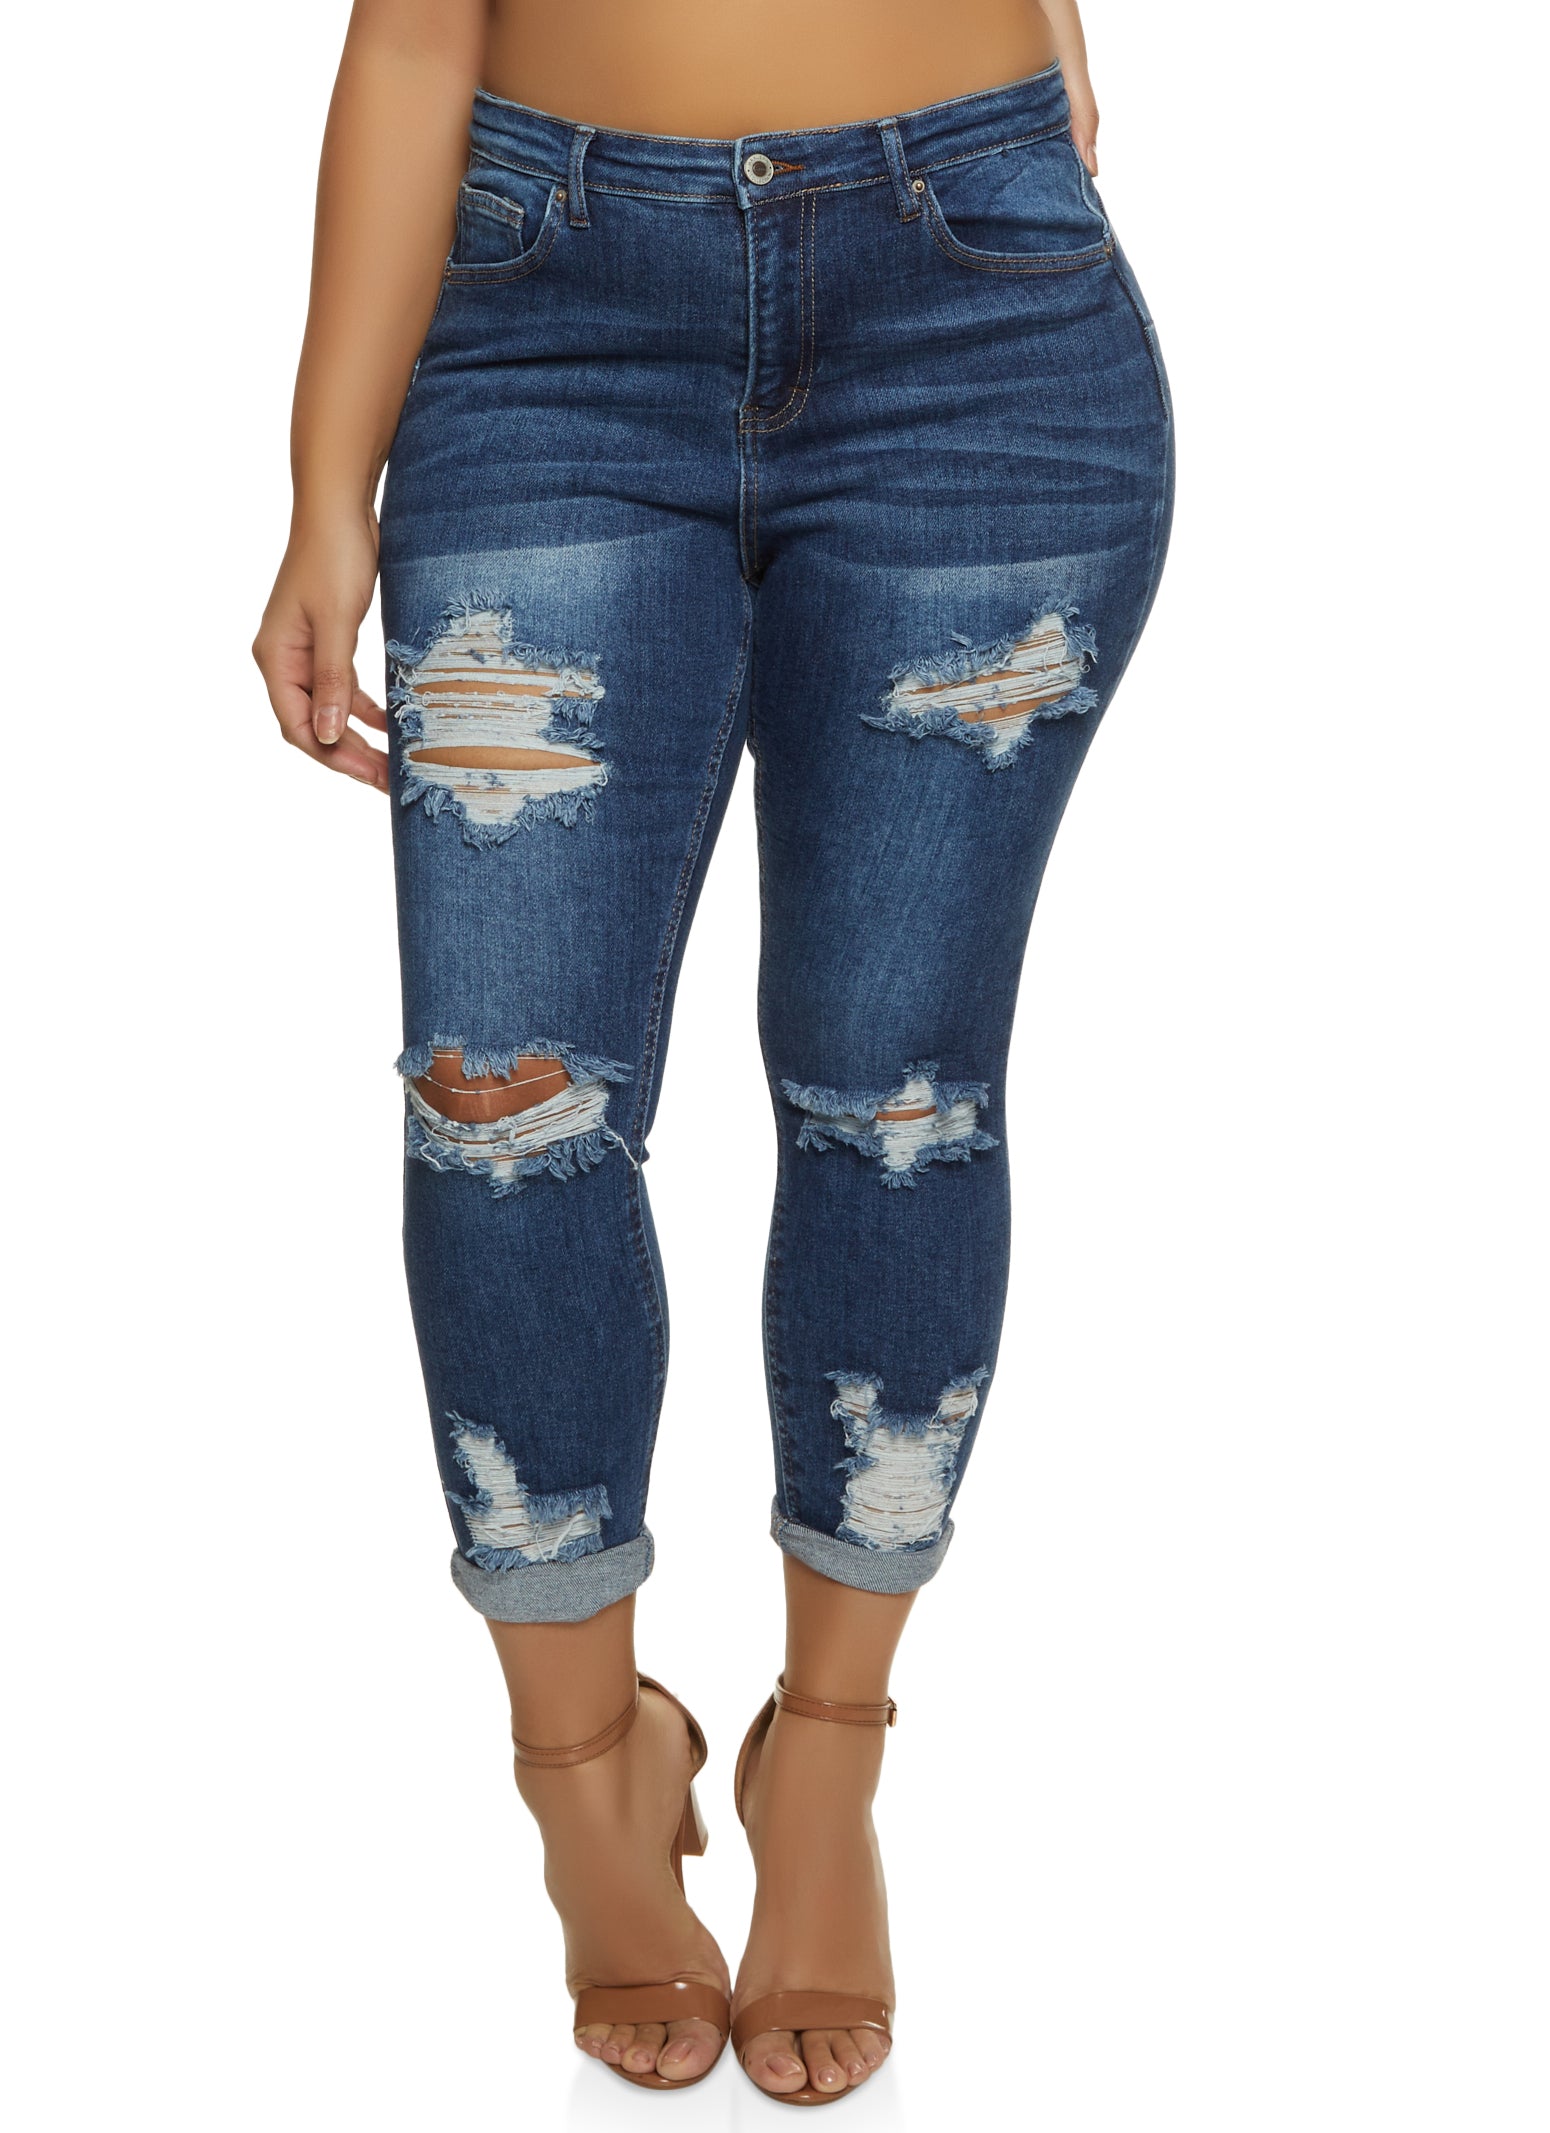 Buy Gboomo Womens Plus Size High Waisted Jeans Ripped Skinny